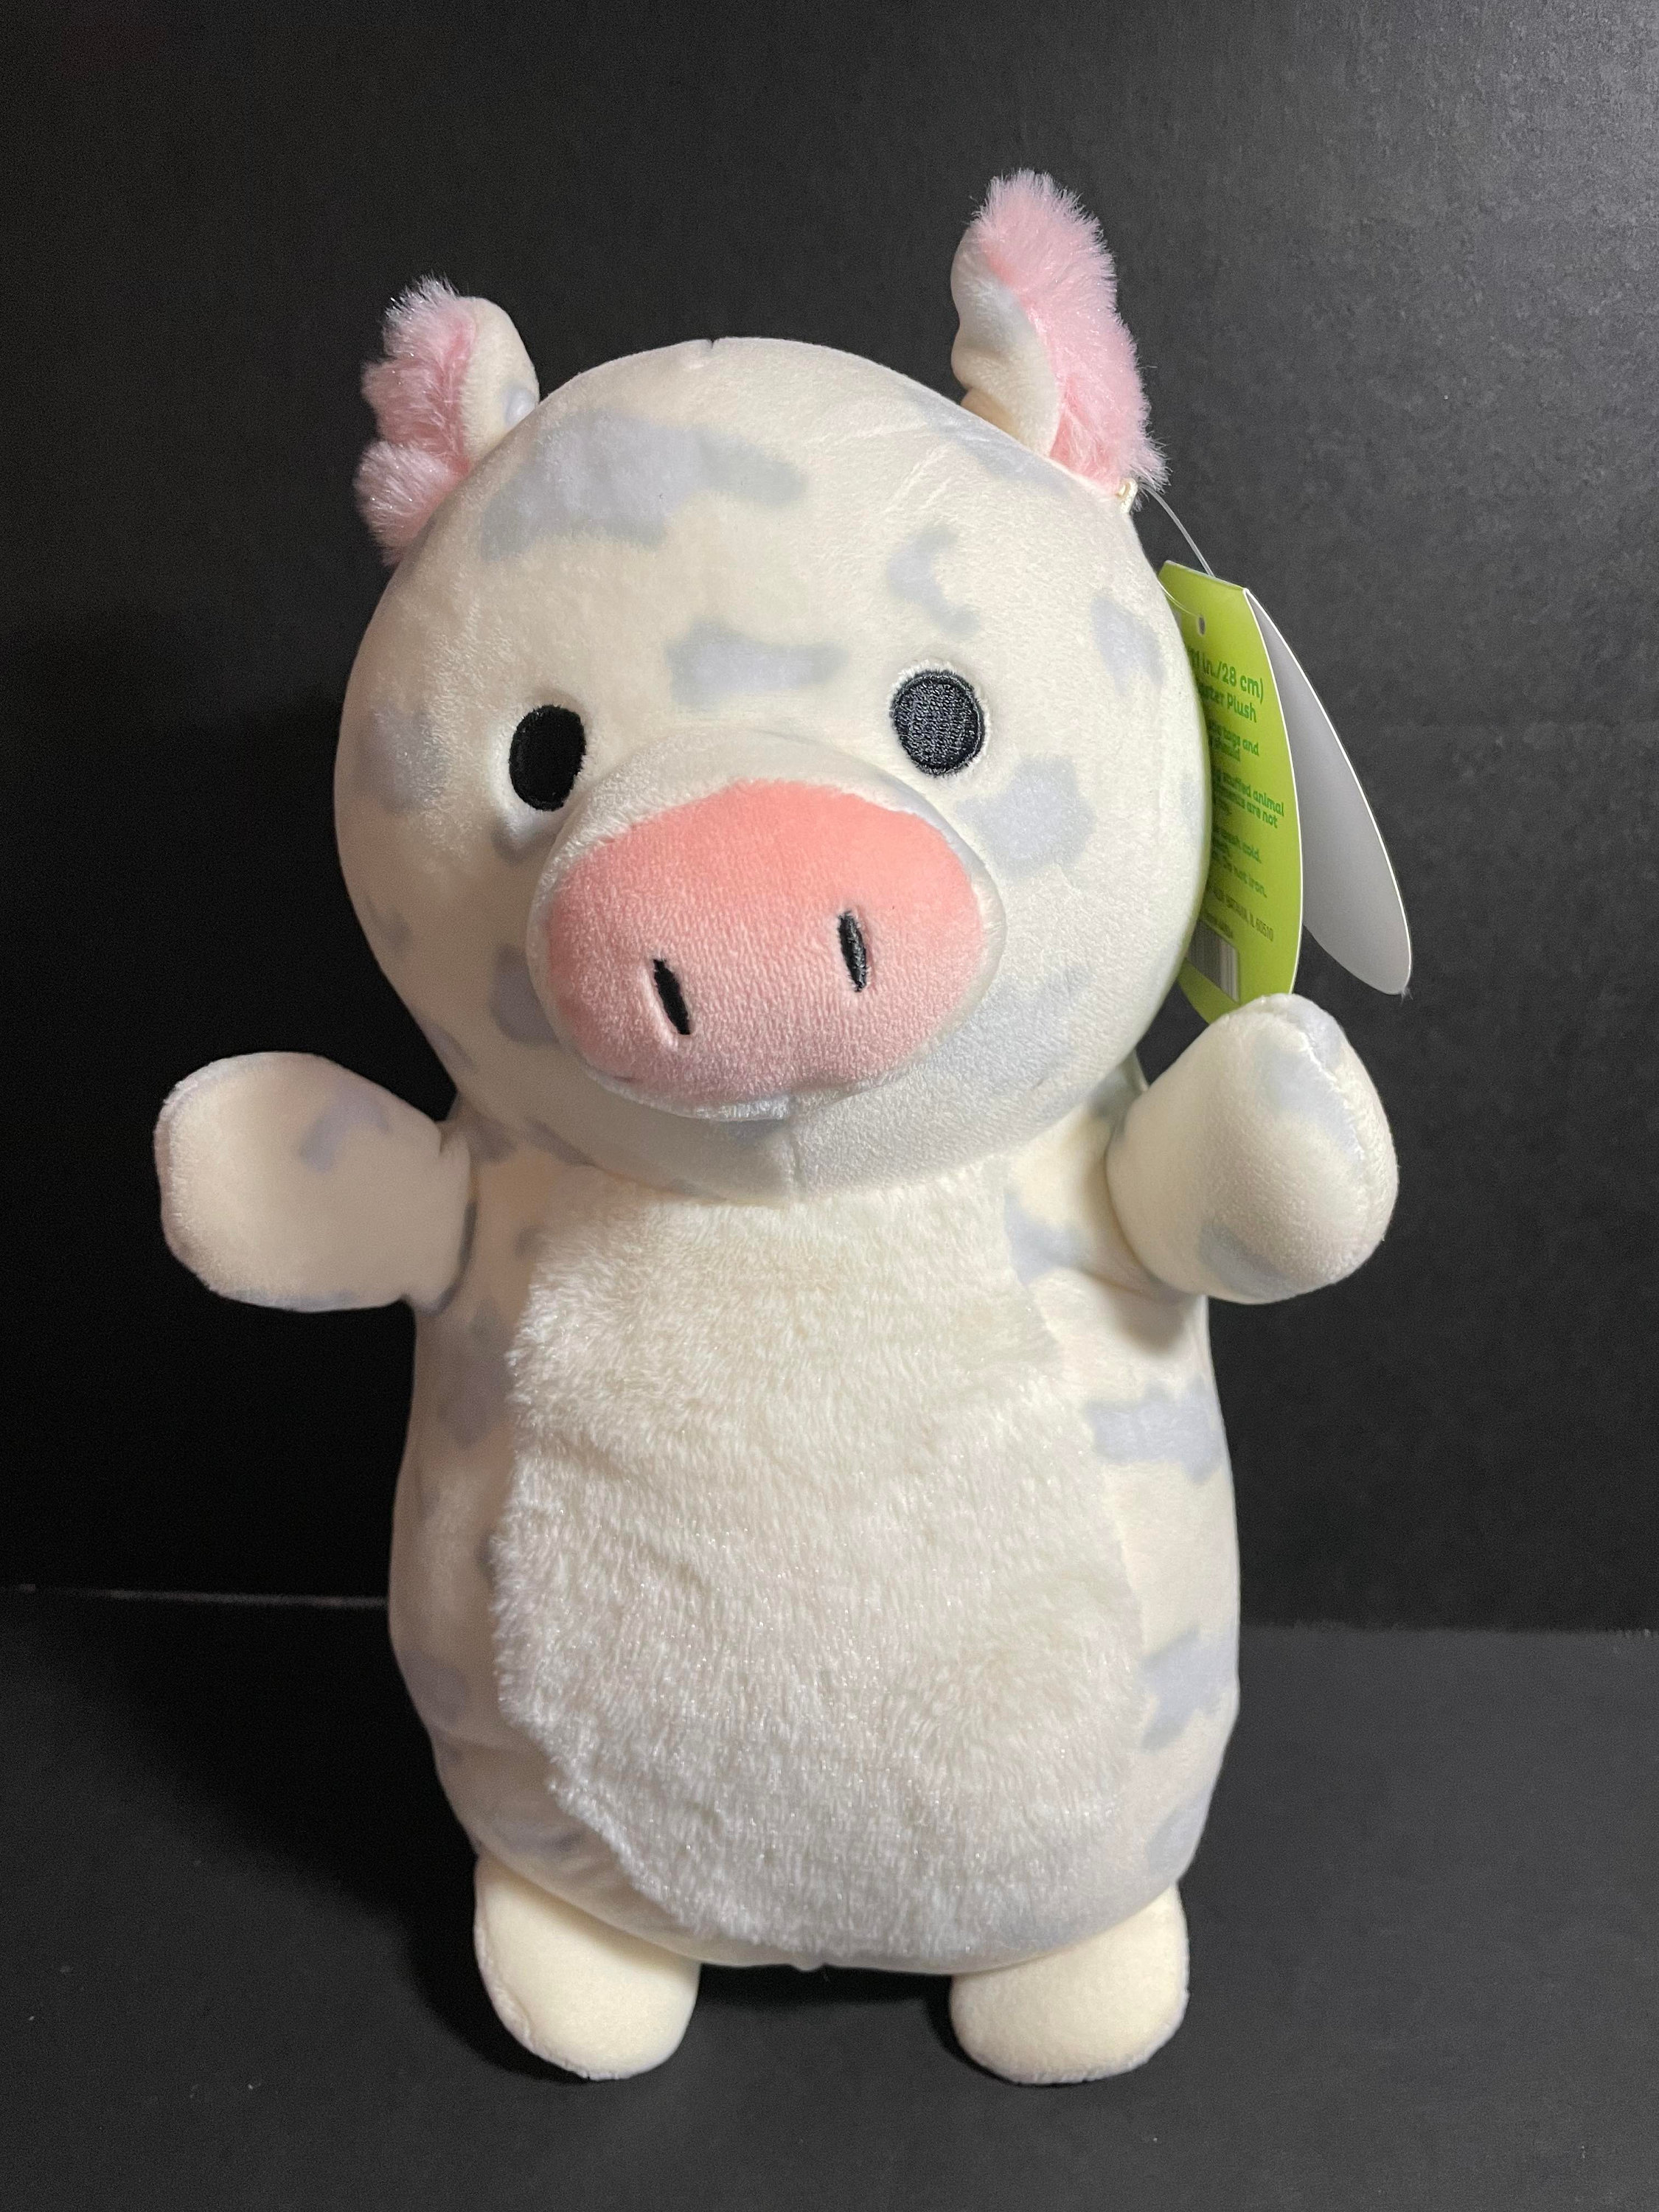 🌼Squishmallow 14” Reese the Pig Hug Mees SPRING 2021 NWT🌼